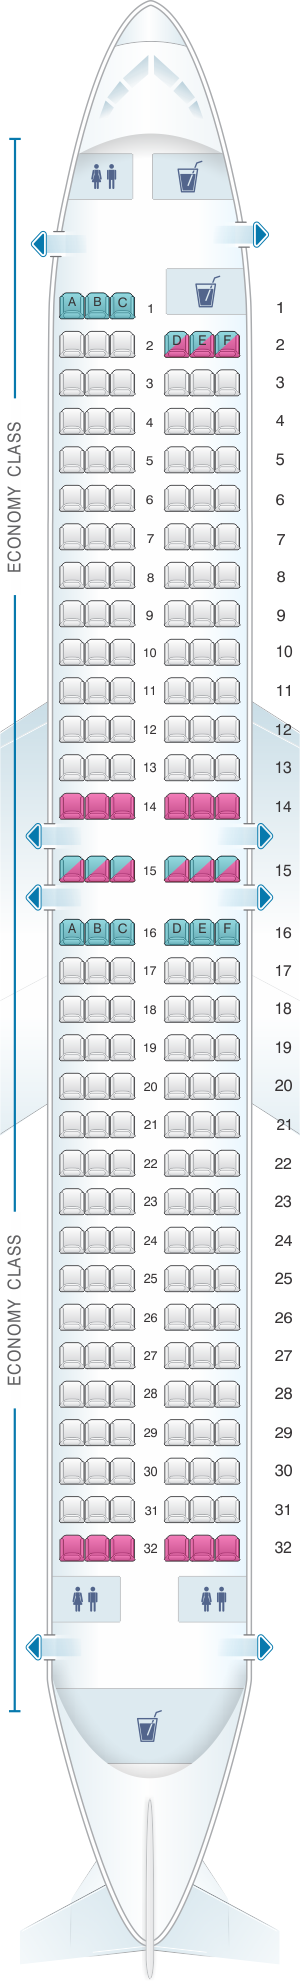 Seat map for TUI Boeing B737-800